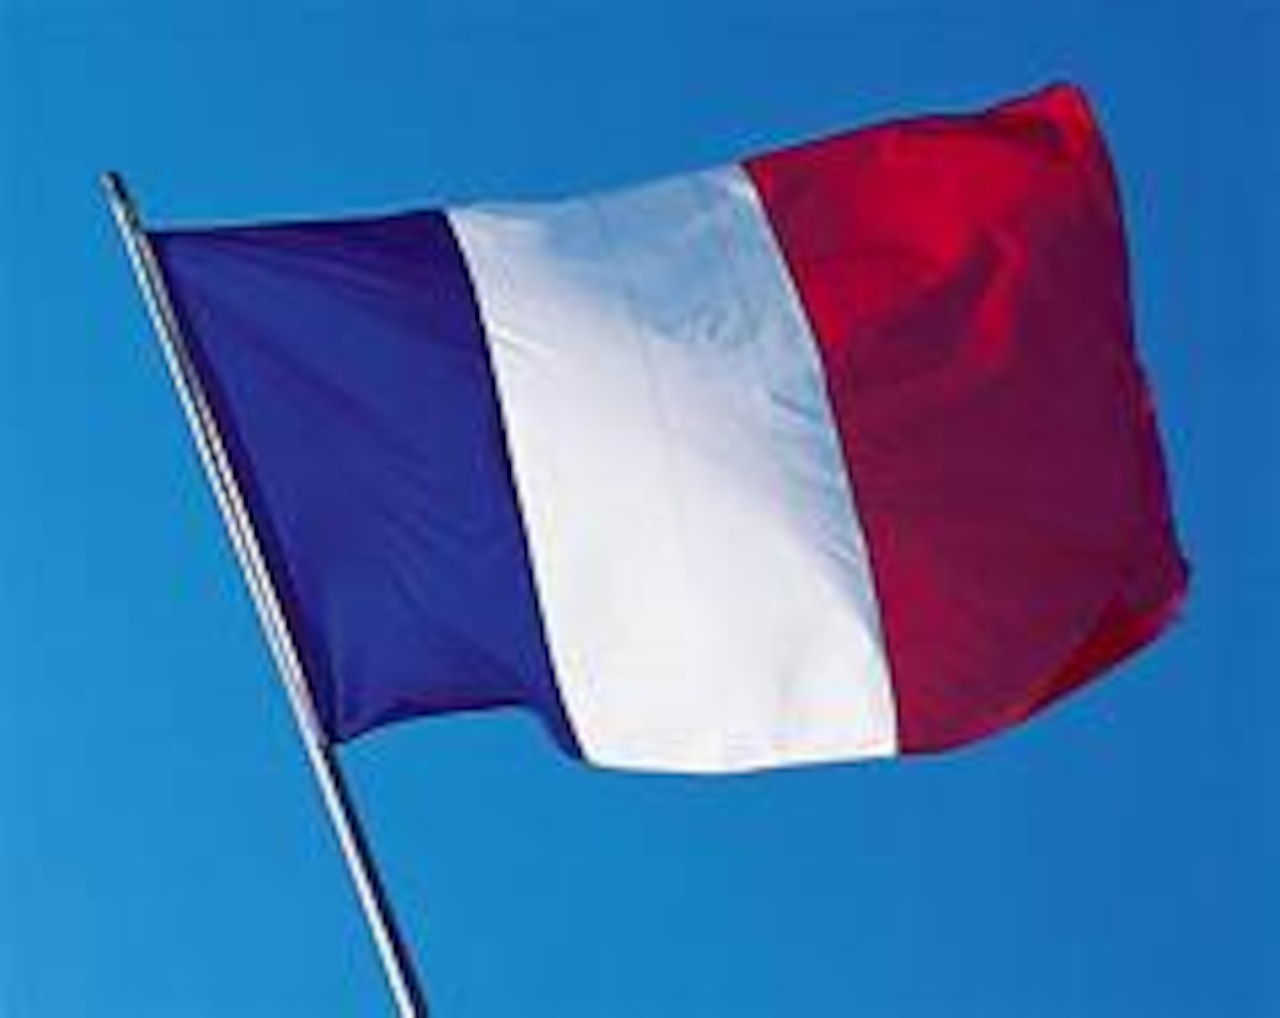 Frenchtown to celebrate Bastille Day on July 13 [Video]